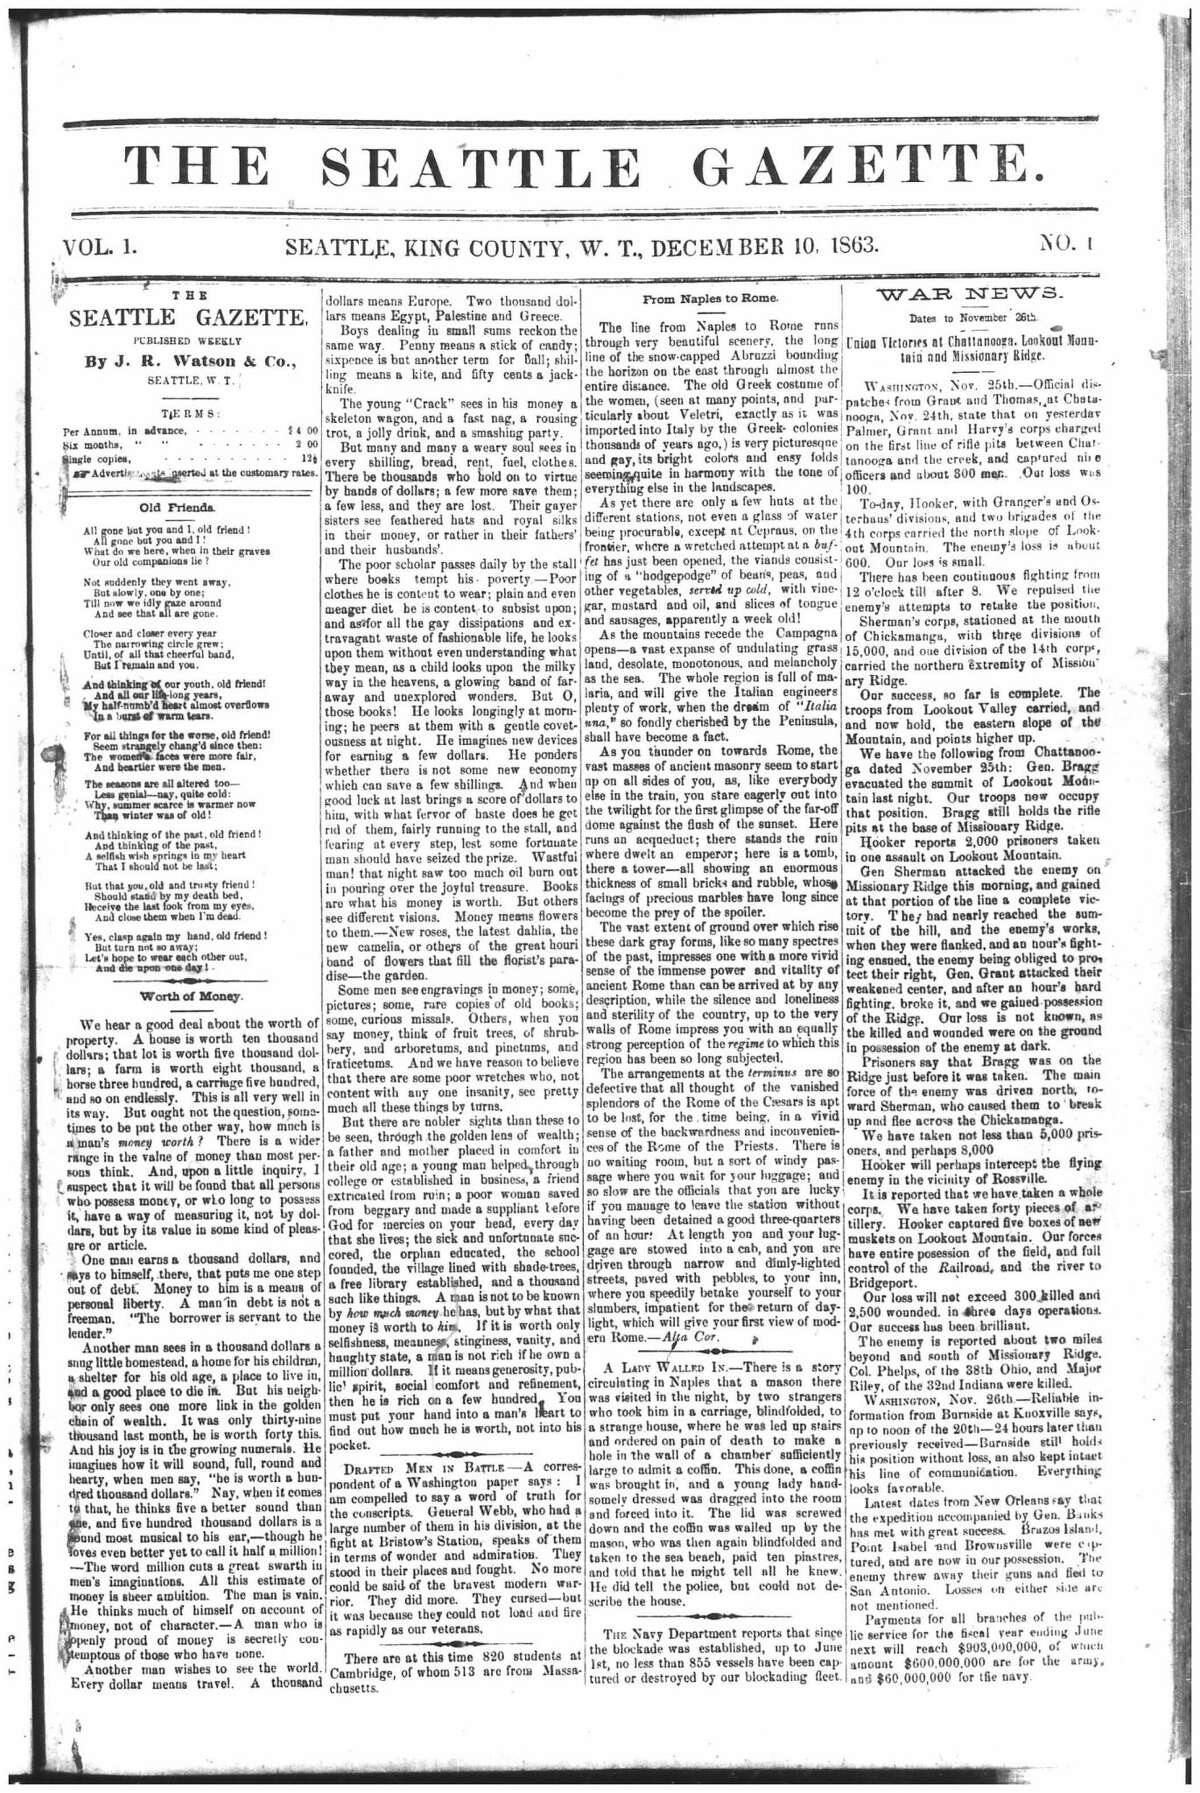 Here's the first edition of The Seattle Gazette, which is considered the debut issue of what was to become The Seattle Post-Intelligencer: Dec. 10, 1863. Stories of the front page included a poem about friendship in old age, Civil War news and a harrowing story from Naples, Italy, in which a mason was kidnapped to carve a hole out of a wall, where a young woman was forced into a coffin that was then inserted into the hole and walled off by the mason.